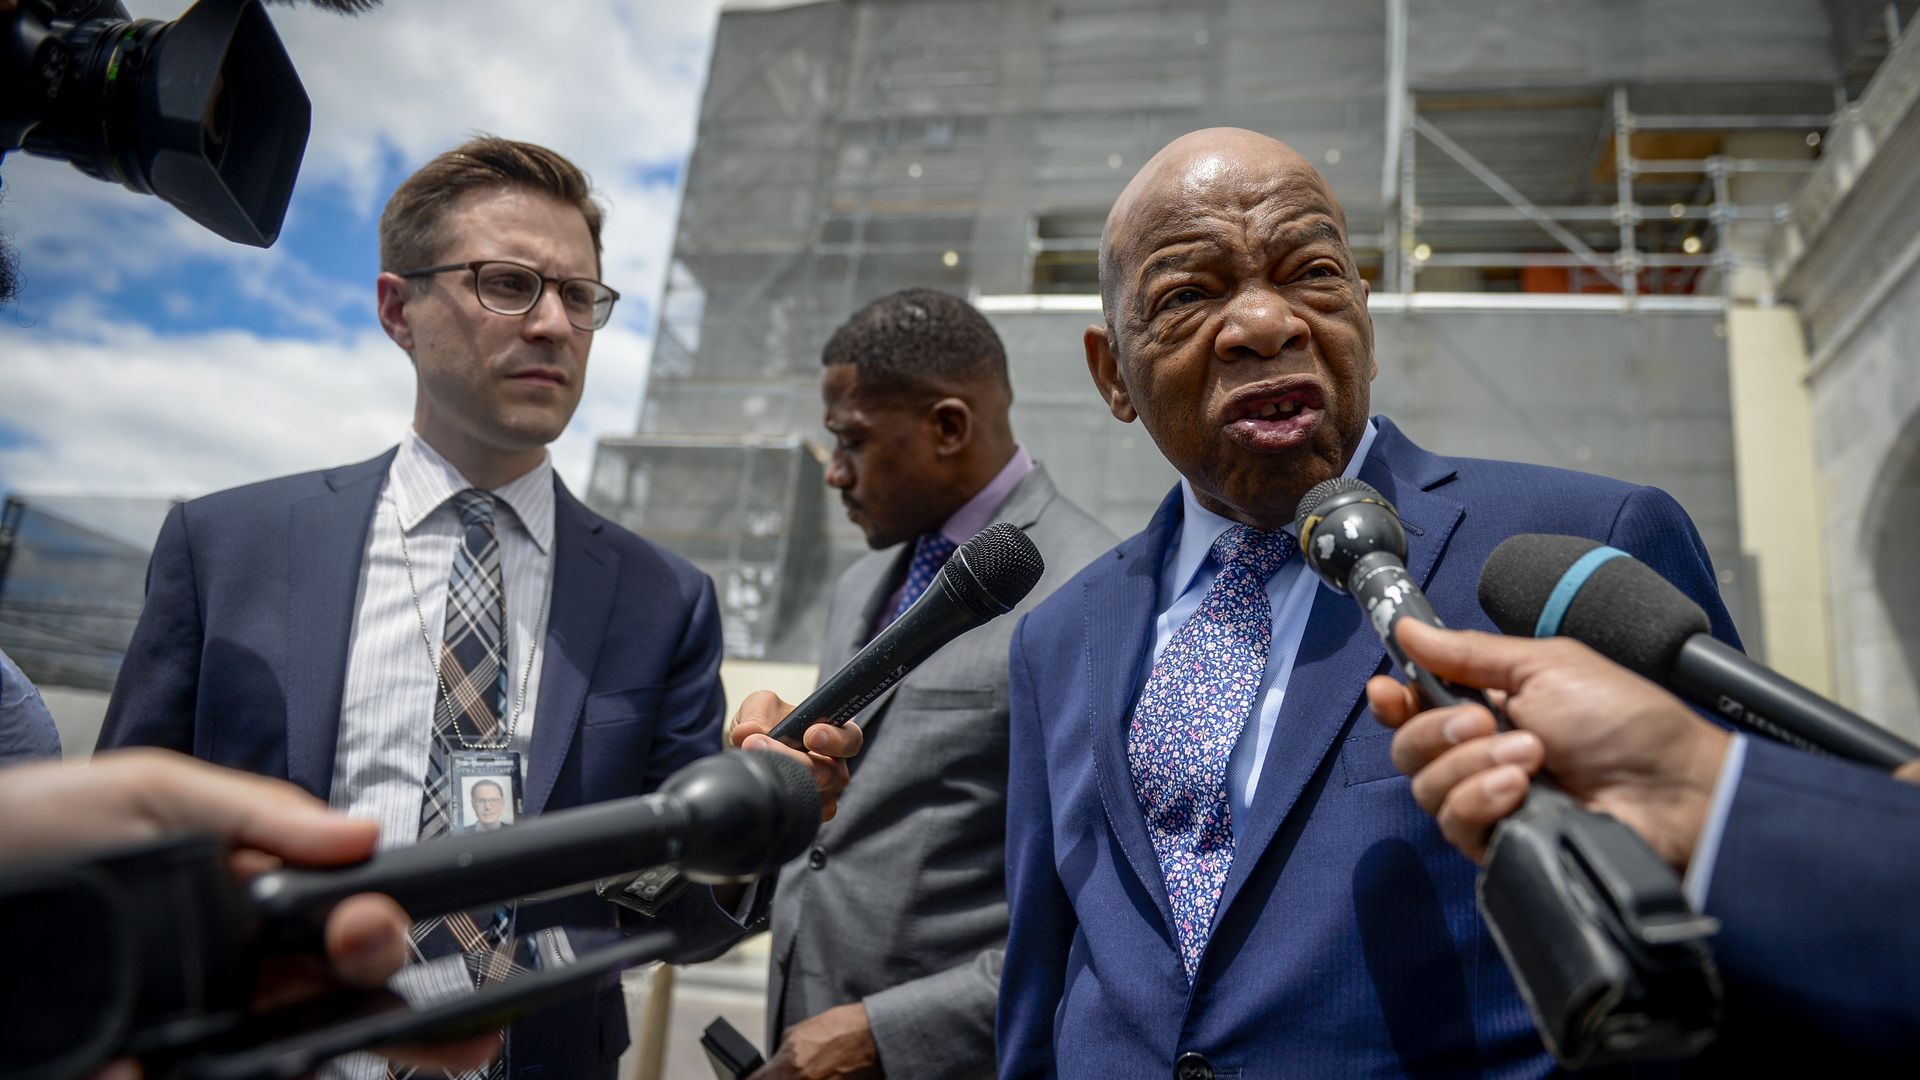 Rep. John Lewis being interviewed by reporters outside of the Capitol building